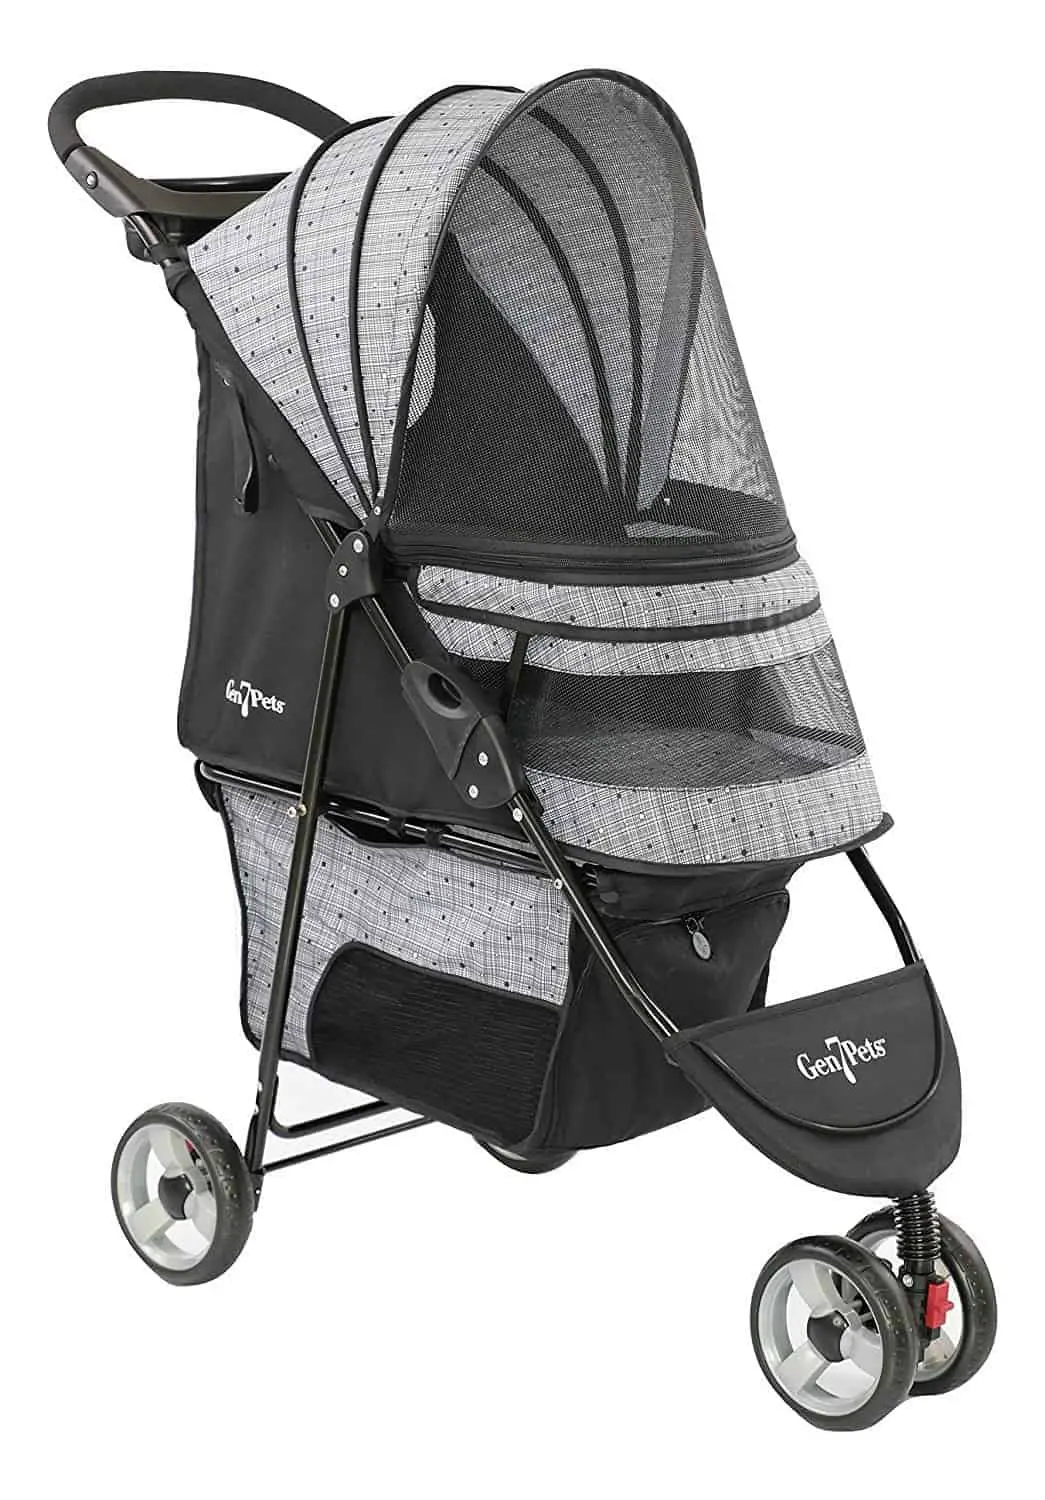 Gen7 Regal Plus Pet Stroller for Dogs and Cats – Lightweight, Compact and Portable with Durable Wheels